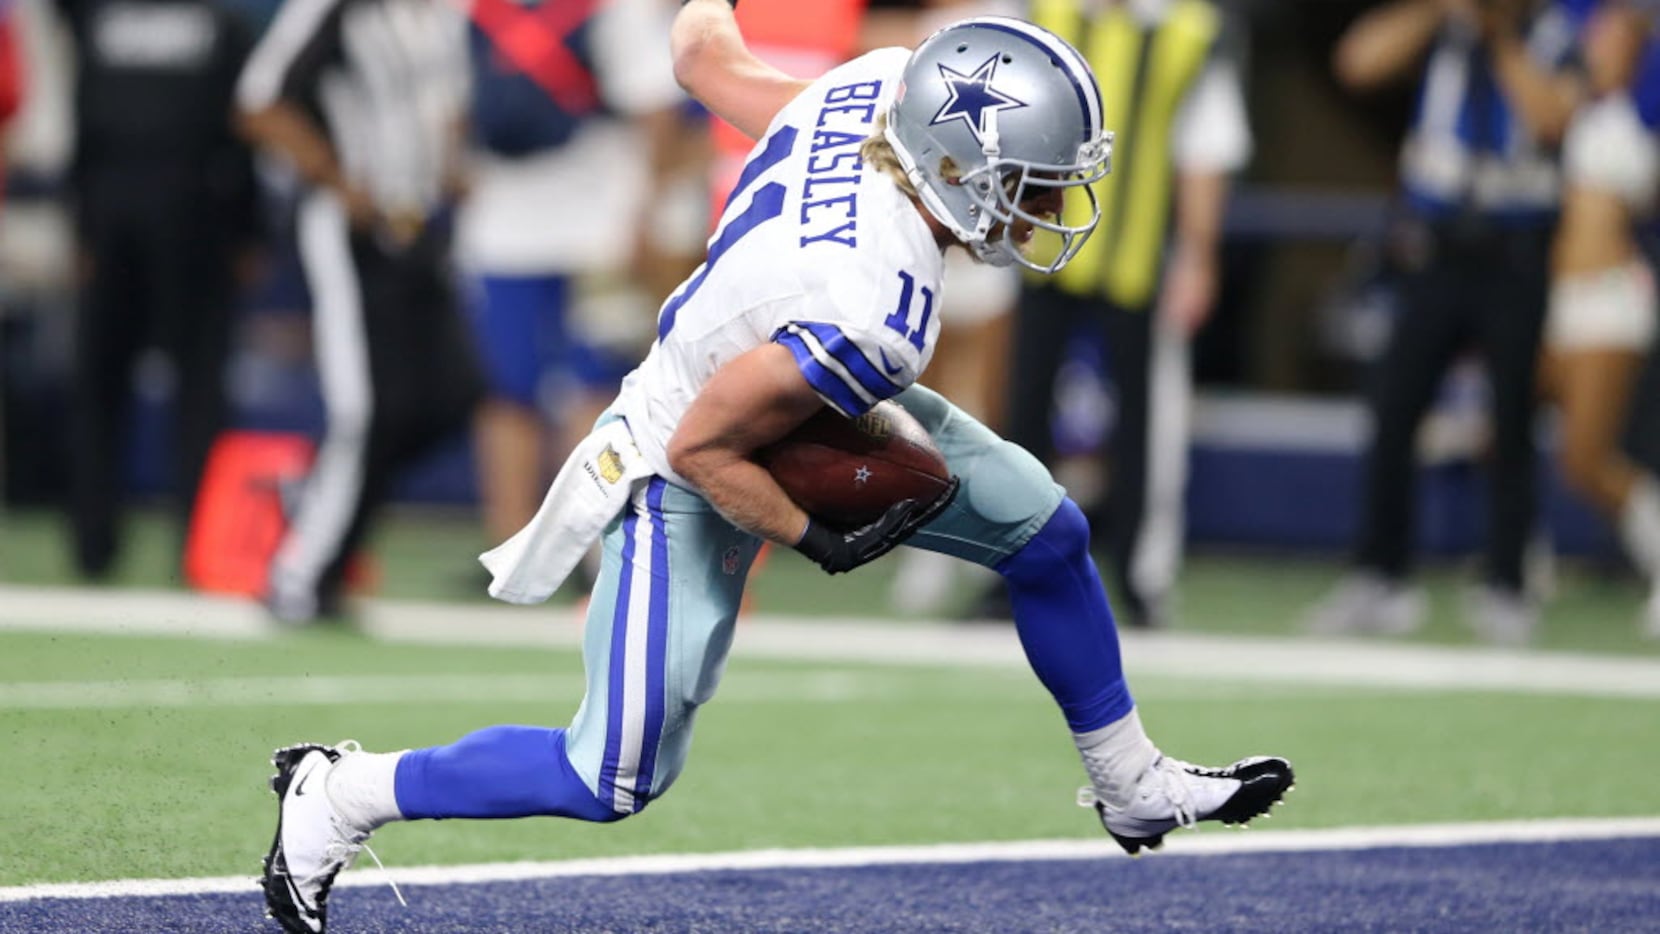 Official NFL Shop confuses Cole Beasley with NBA player